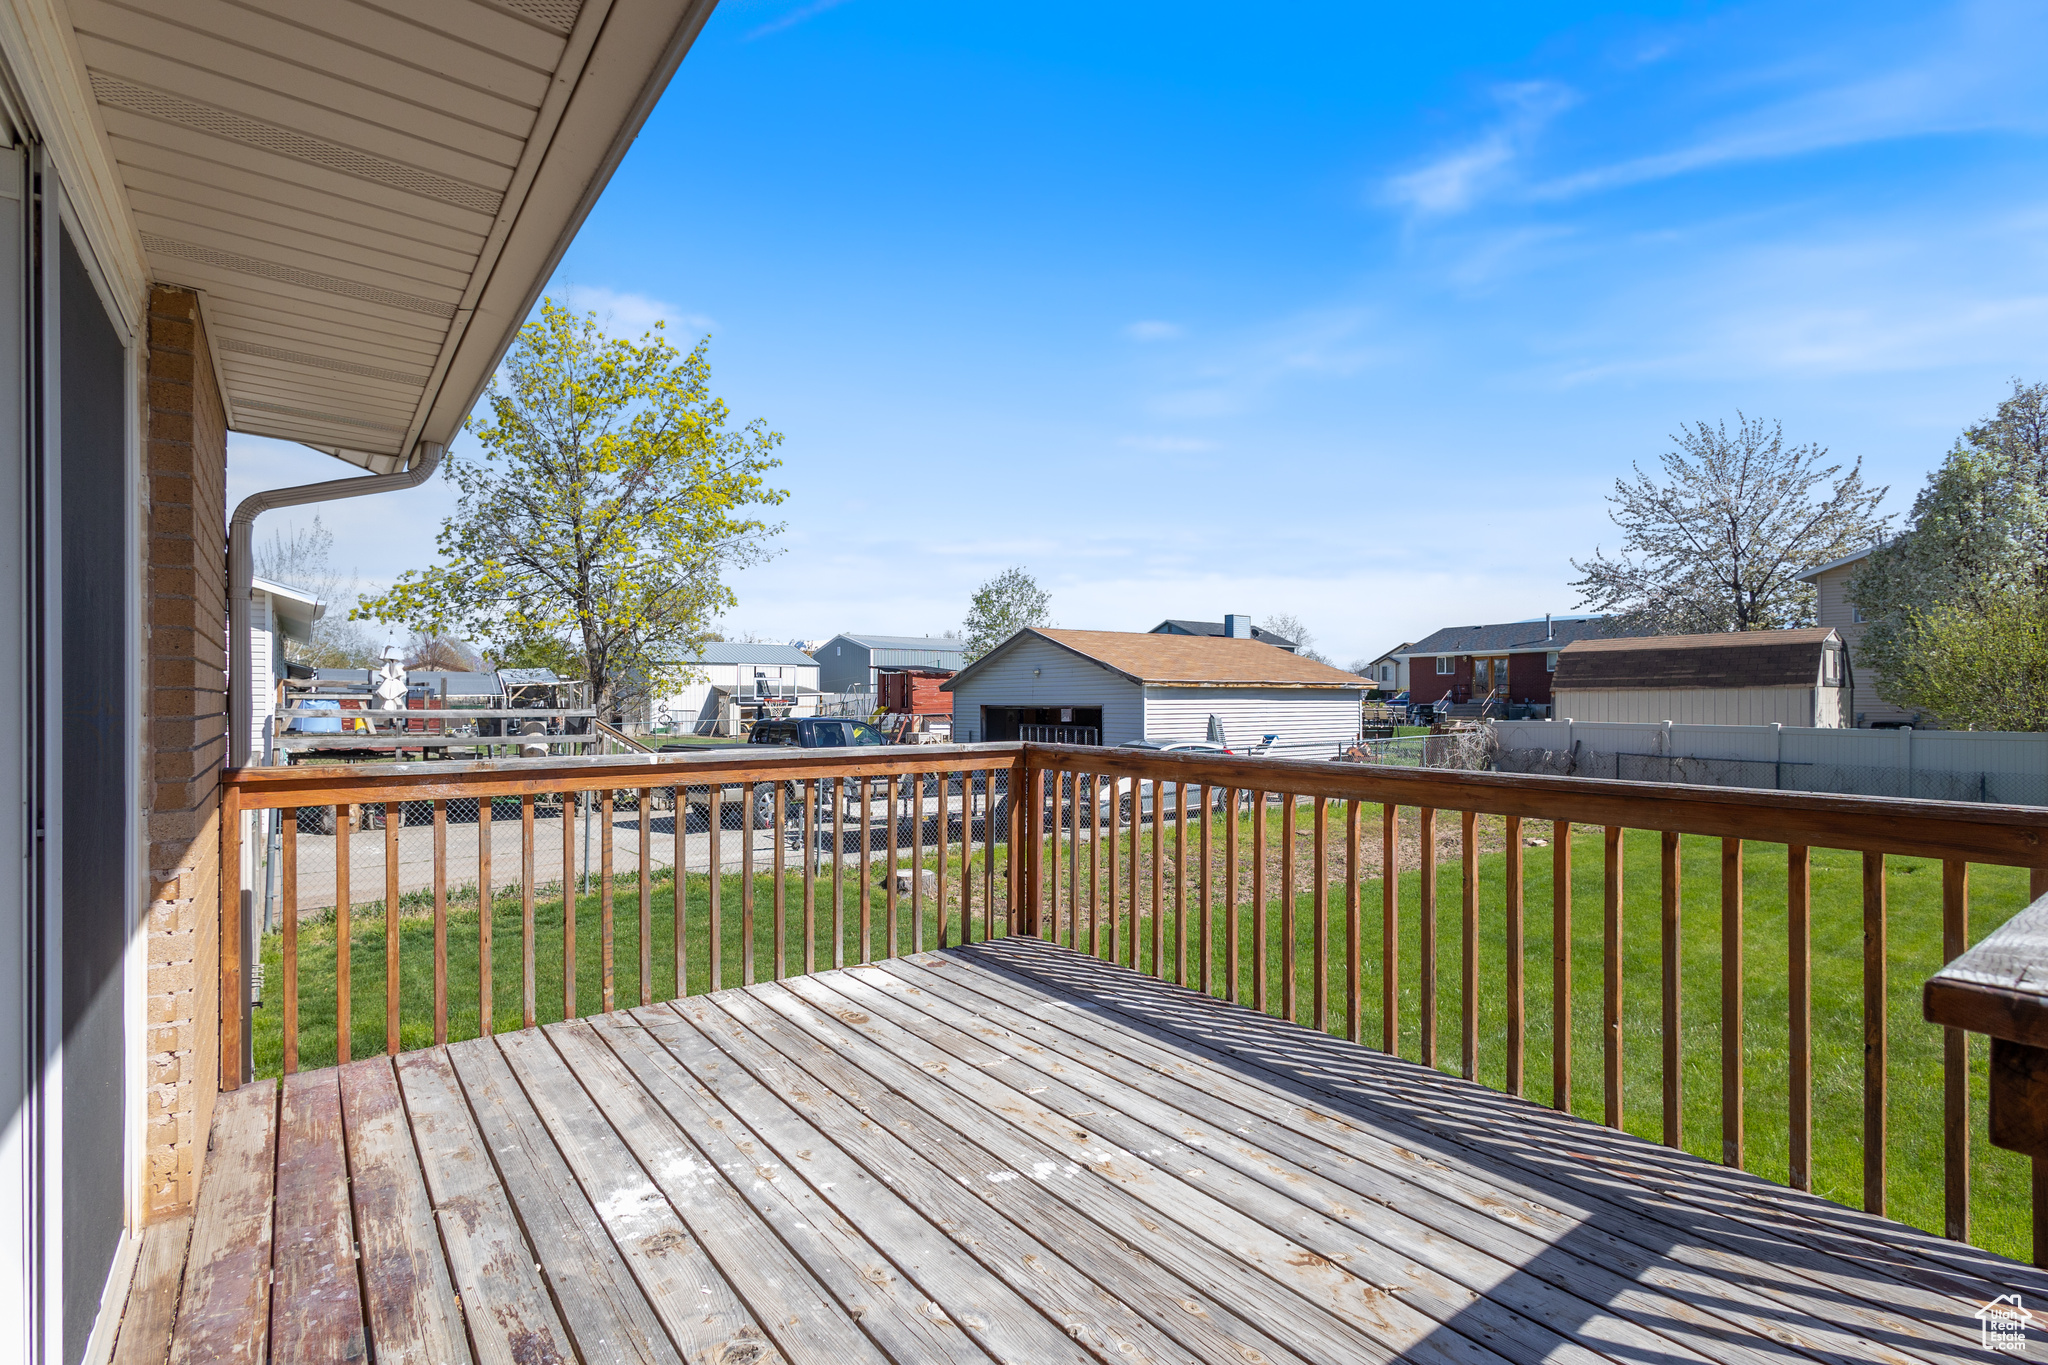 Wooden deck with large yard